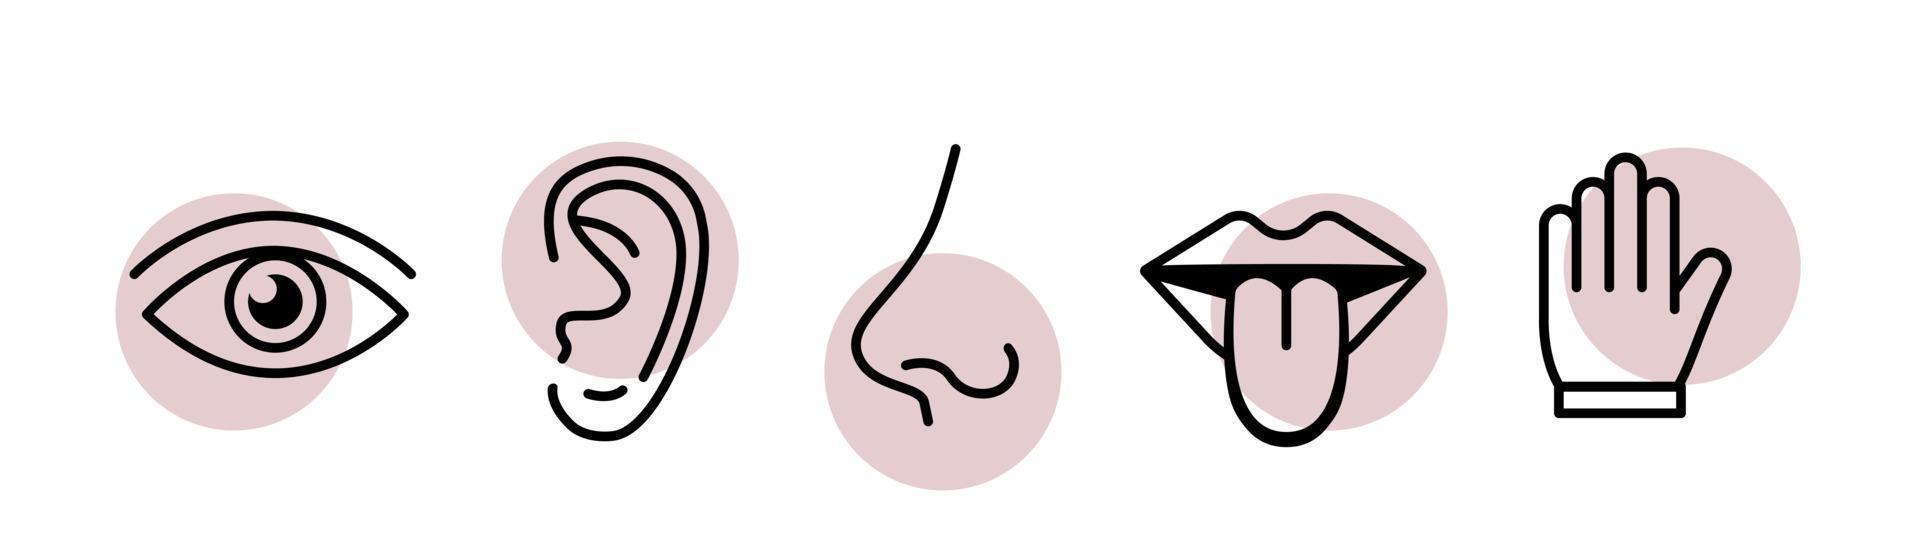 Human sense five types. Vision through eye, smell with nose, taste with tongue. Symbols Drawn with outlines  inside color circles. Isolated flat vector illustration on white background